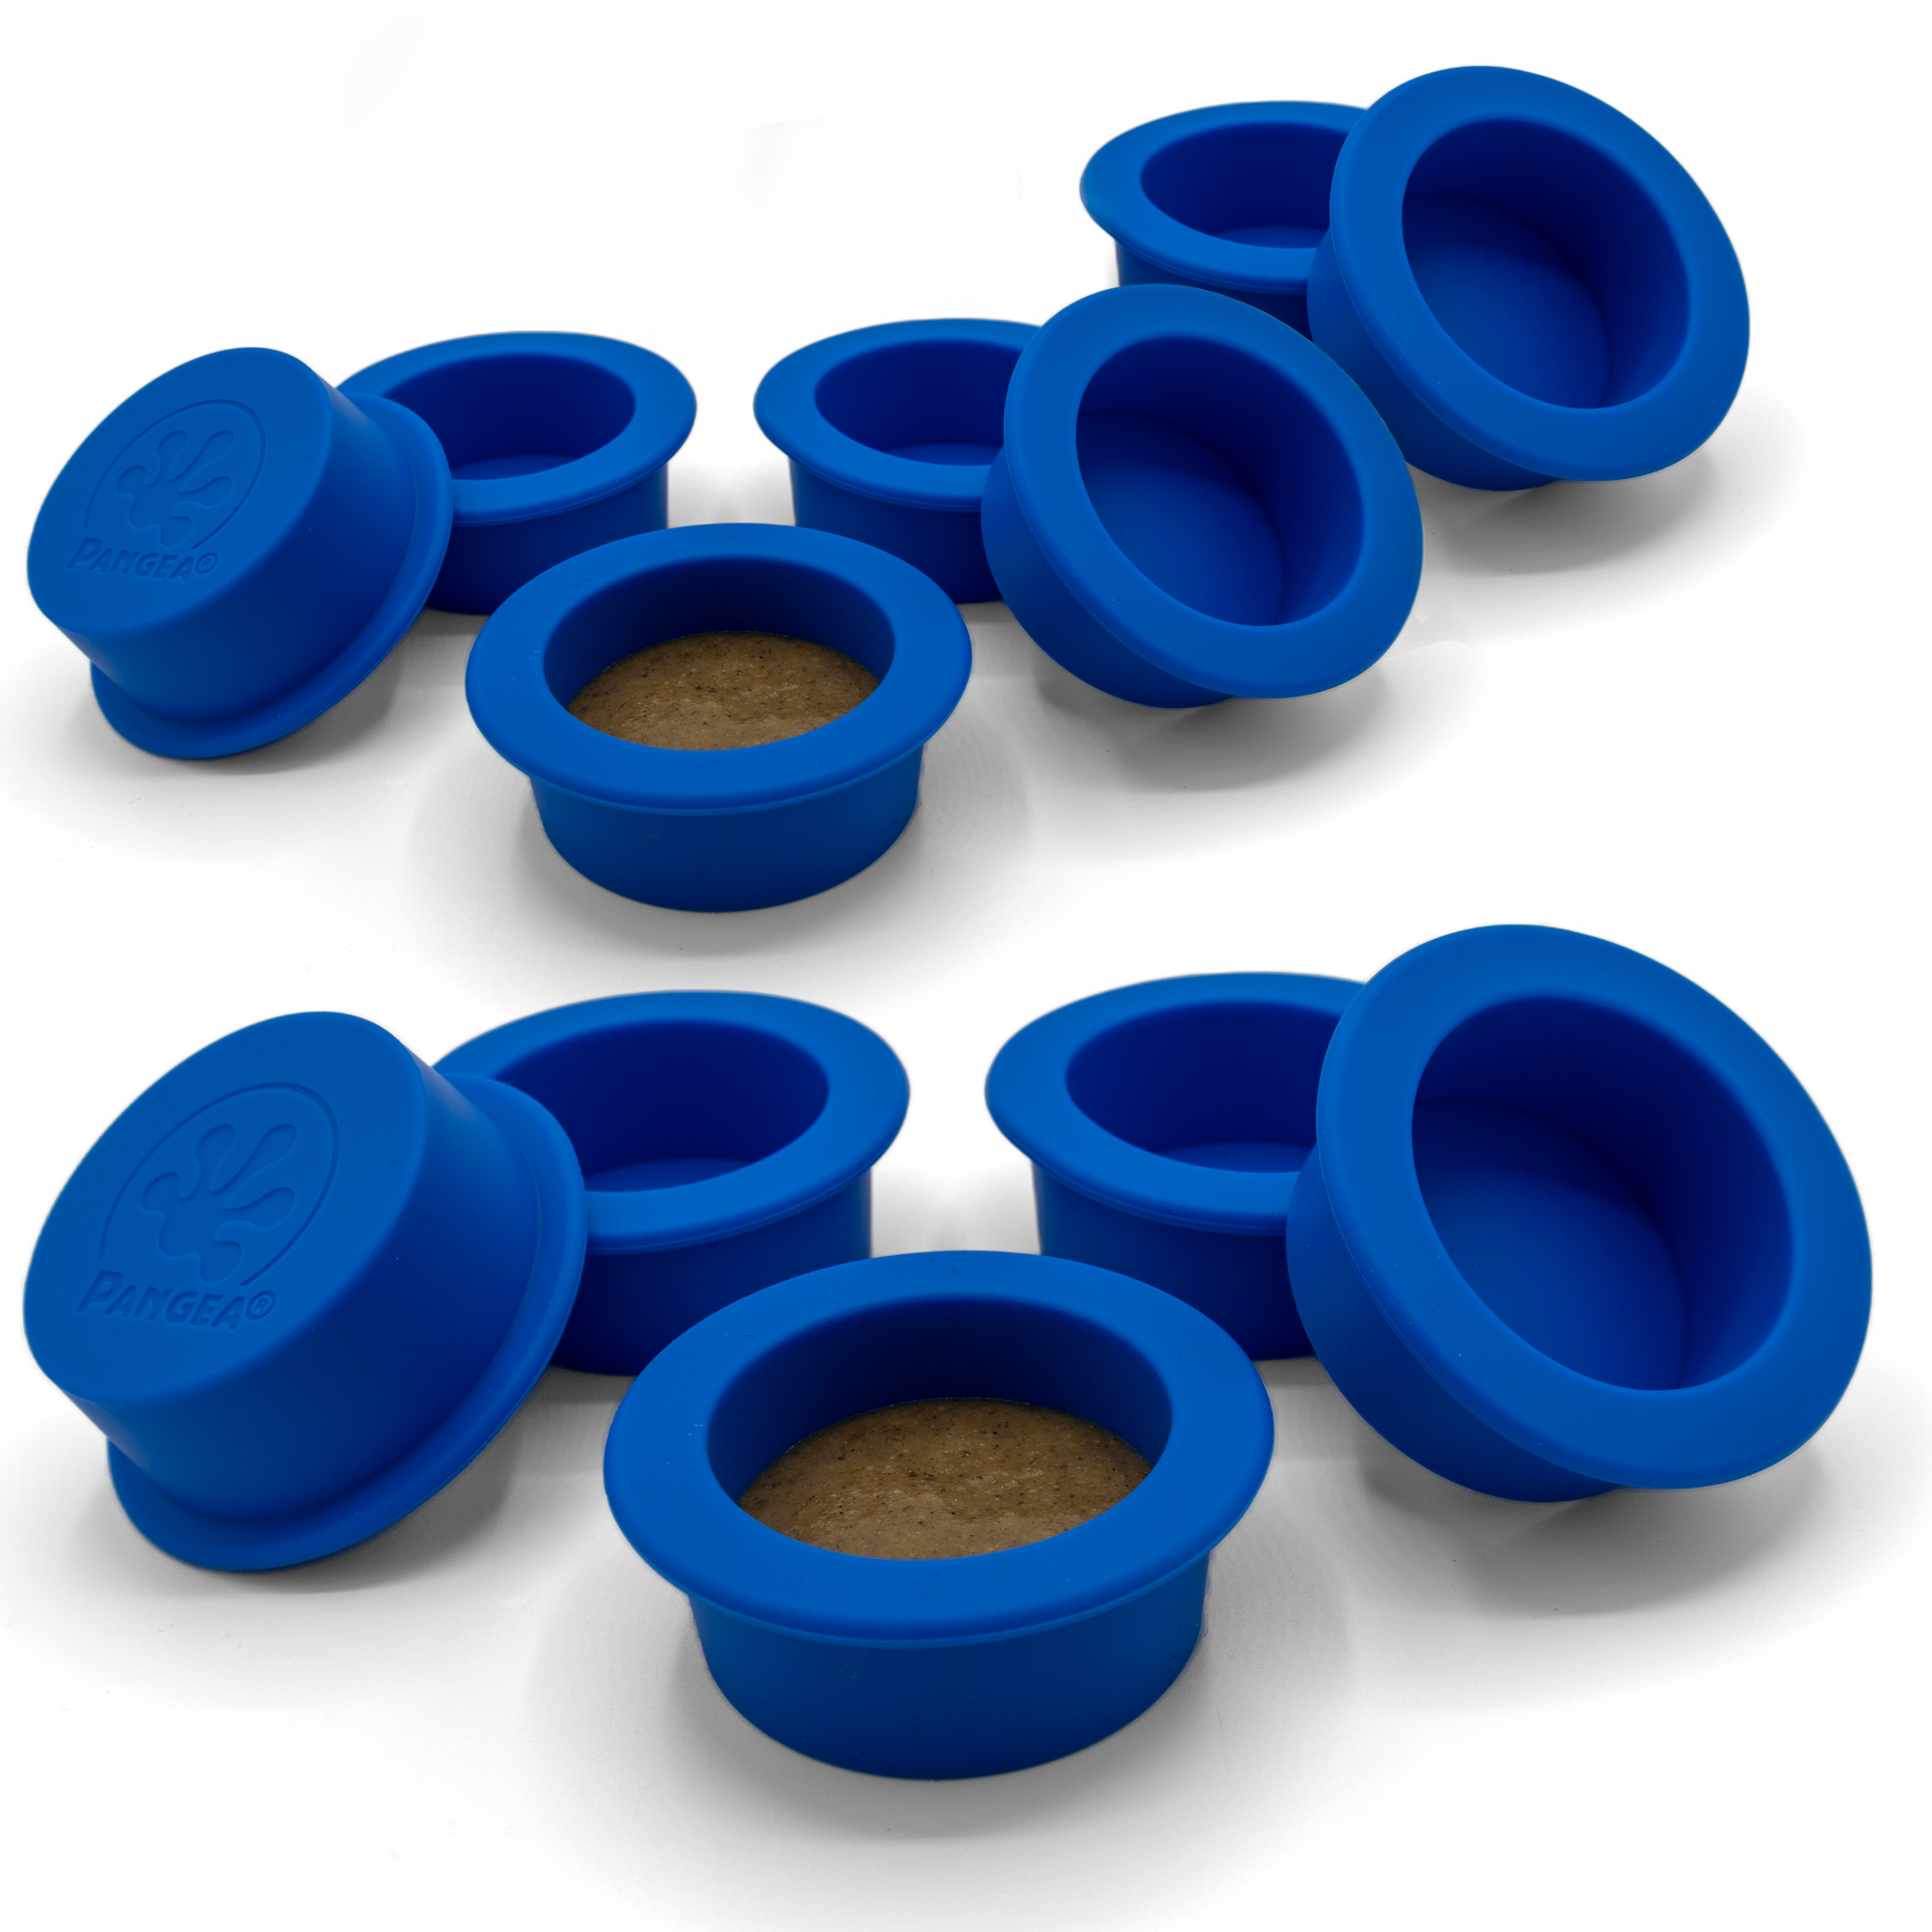 12-Pack of Large Silicone Gecko Feeding Cups - Blue